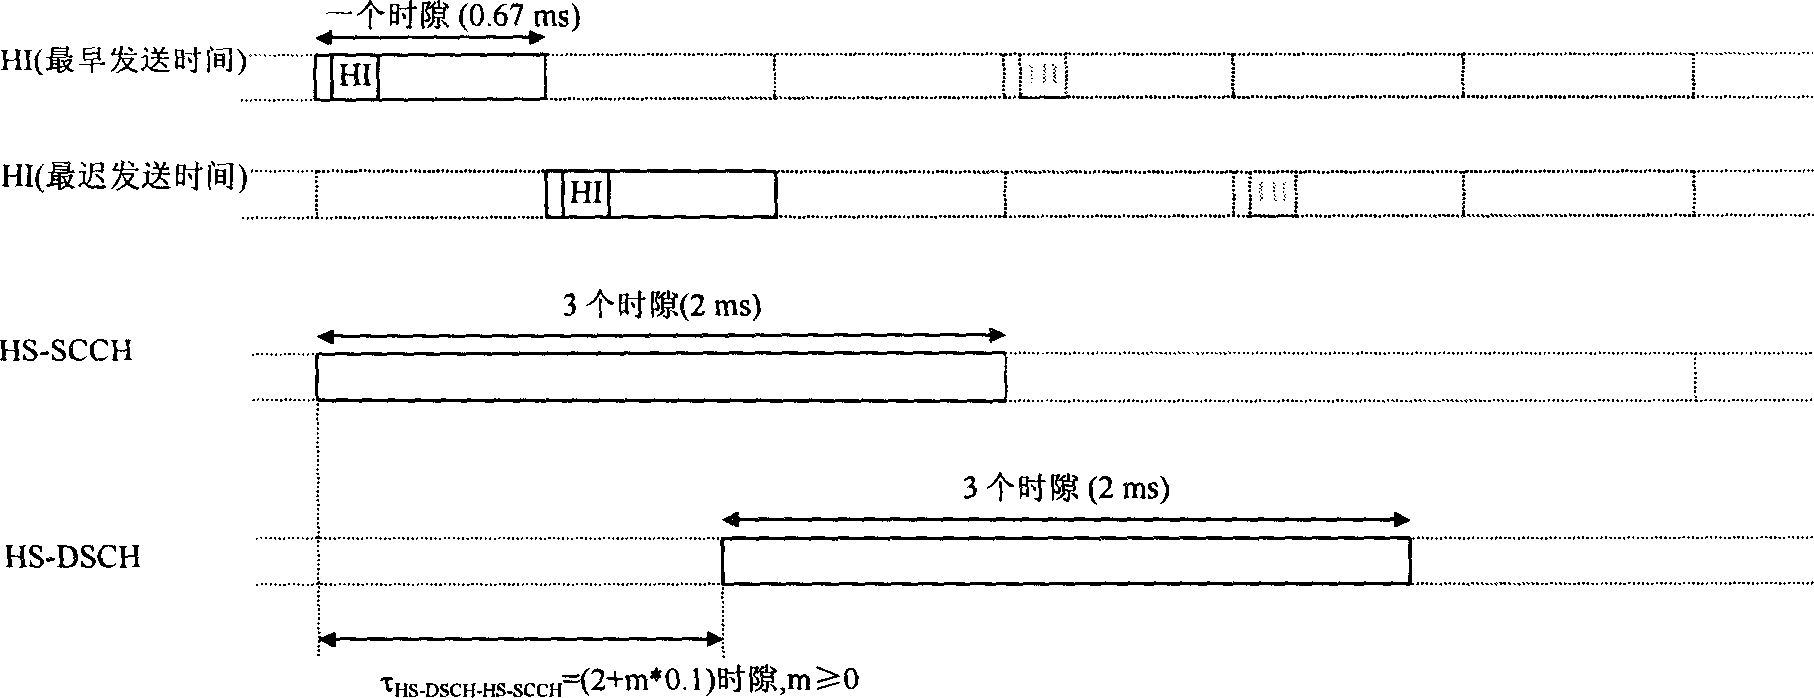 Data transmission control method of downgoing high speed shared channel in high speed data insertion system